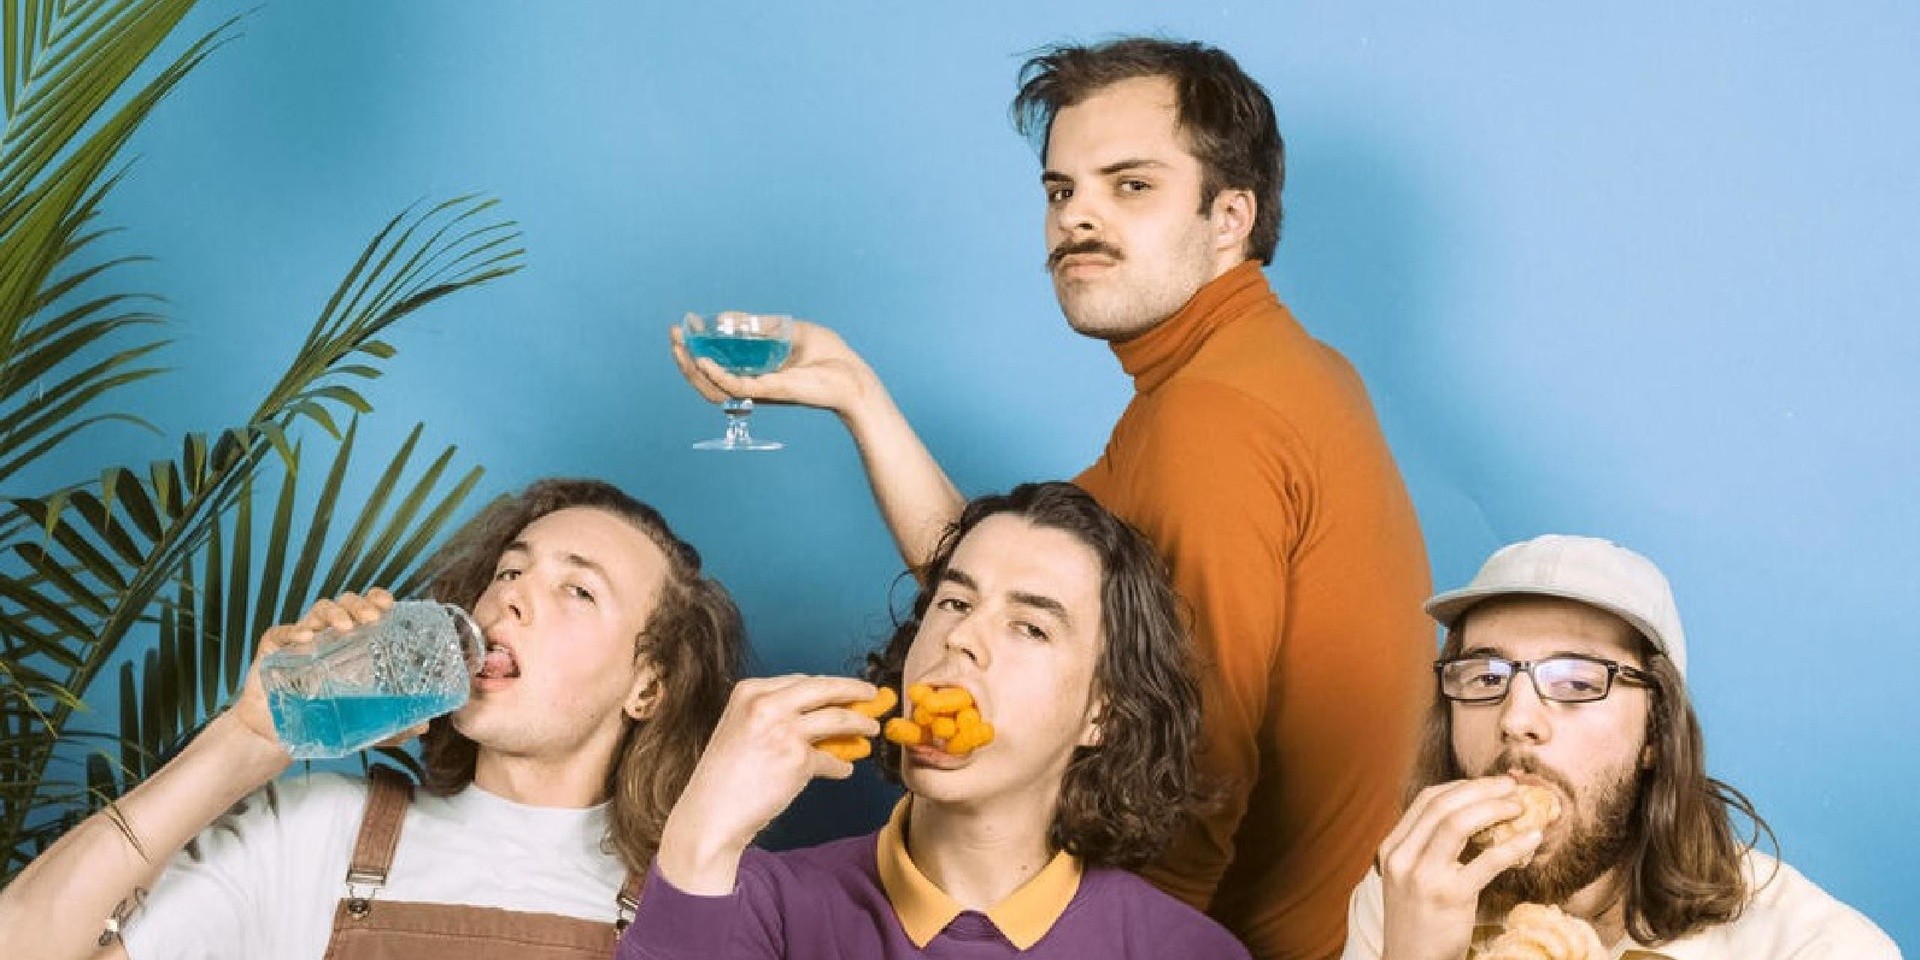 Peach Pit will play an additional show in Singapore